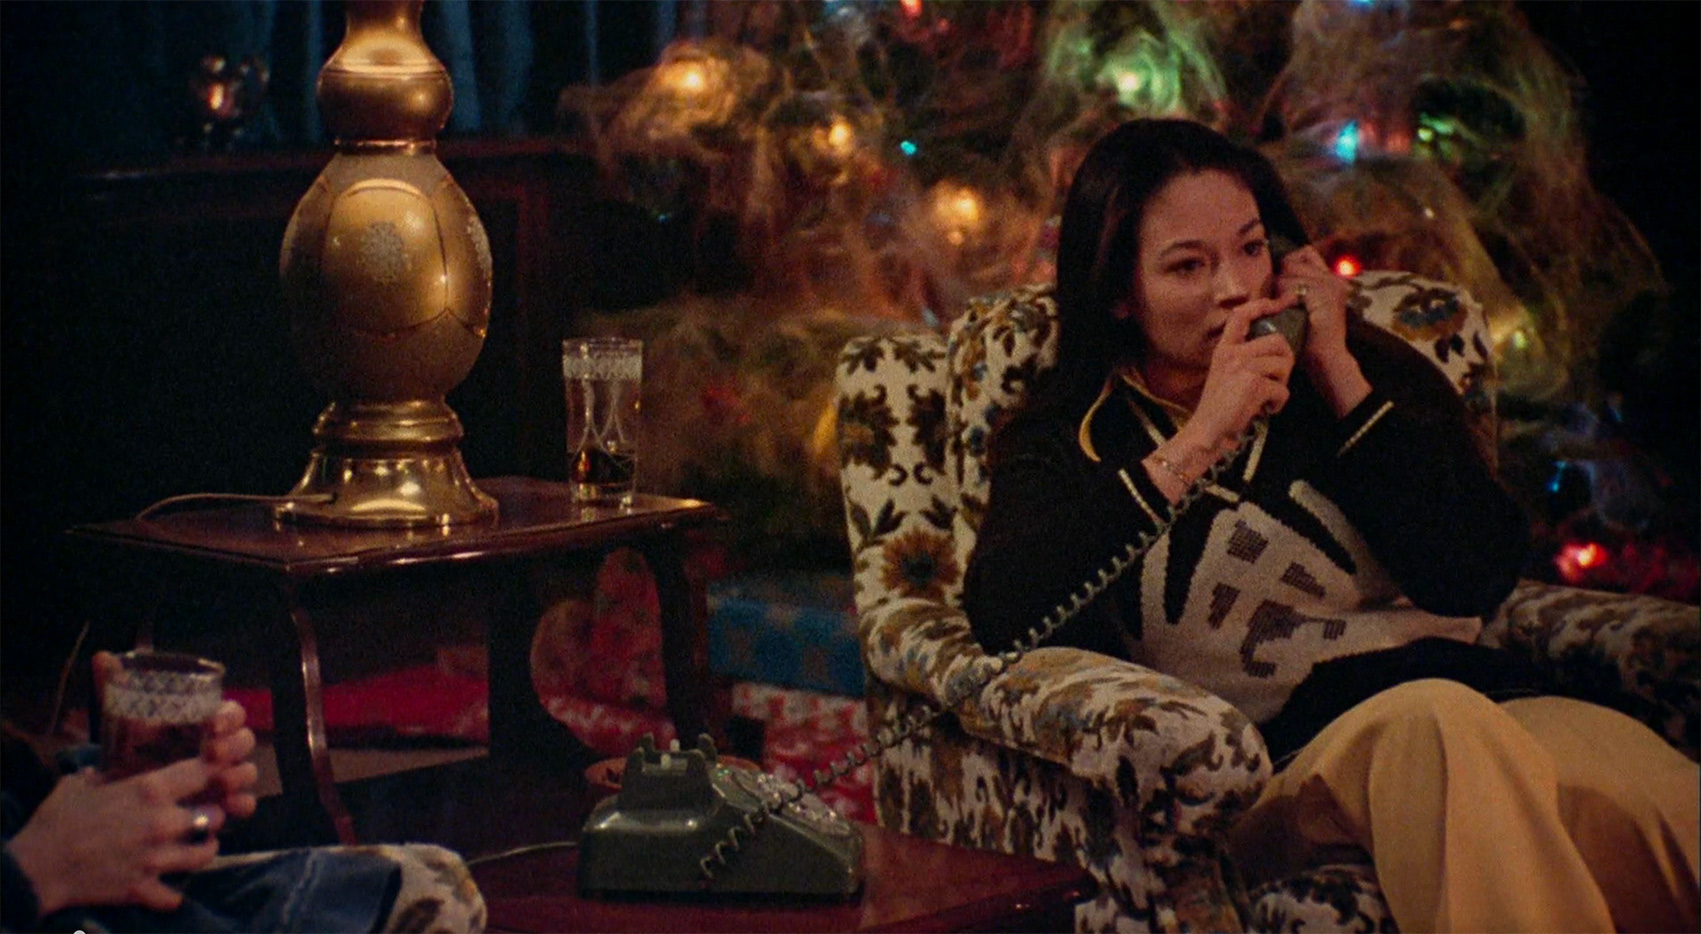 Olivia Hussey answering the phone in front of a Christmas tree.